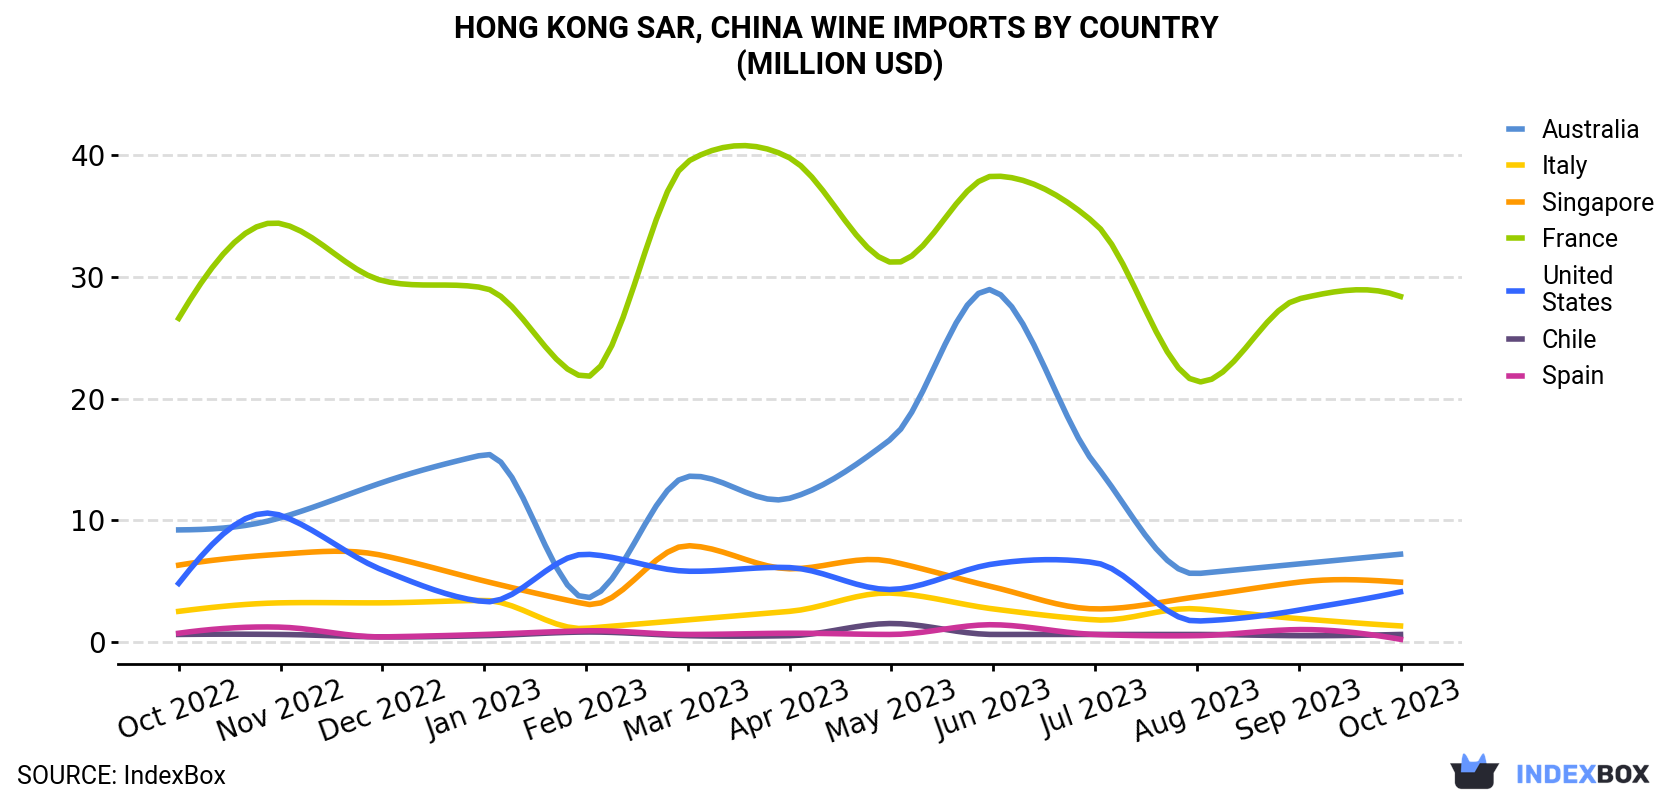 Hong Kong Wine Imports By Country (Million USD)